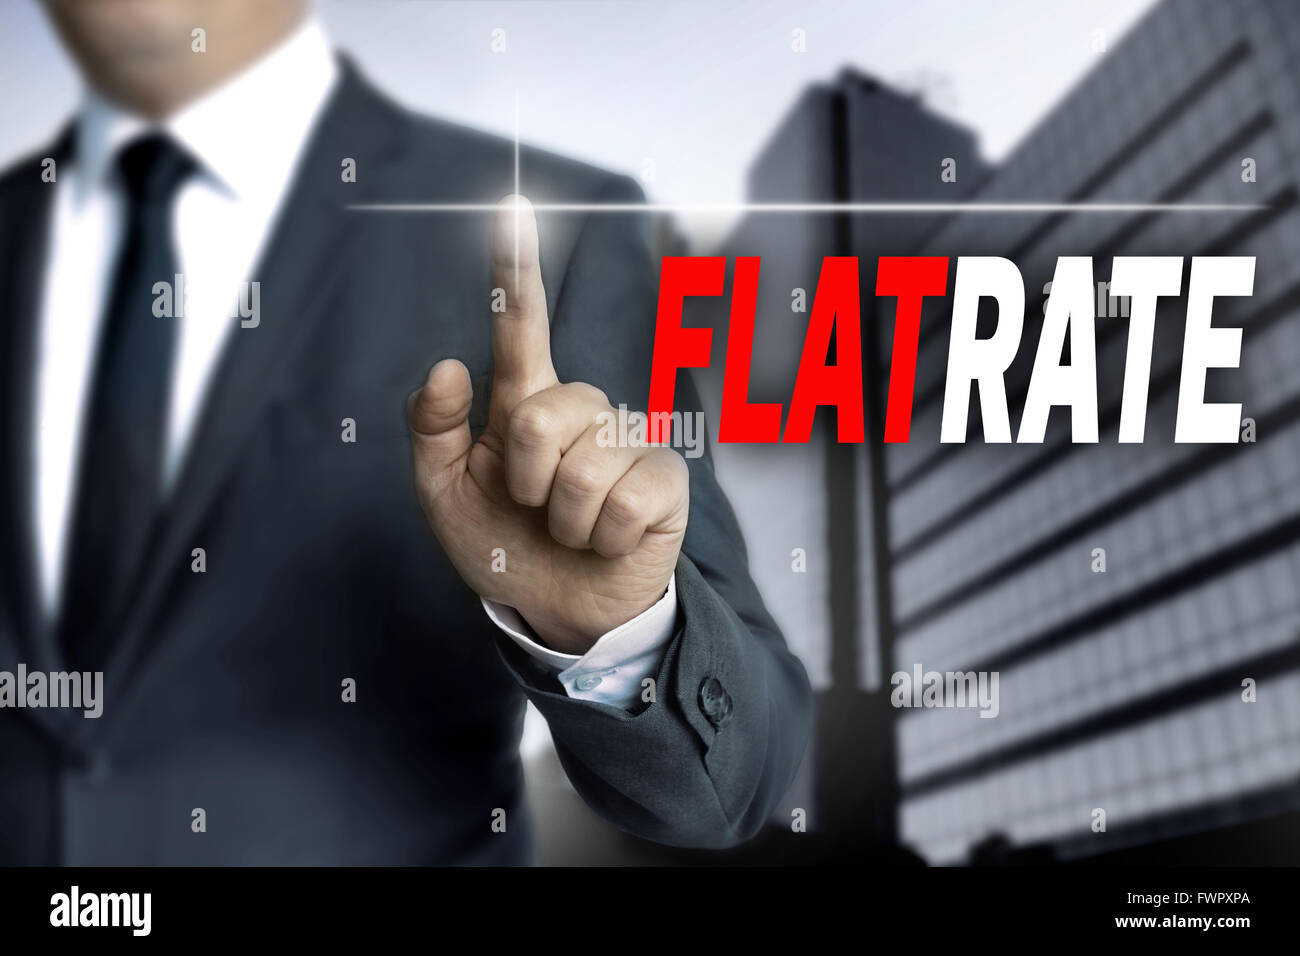 flatrate touchscreen is operated by businessman. Stock Photo